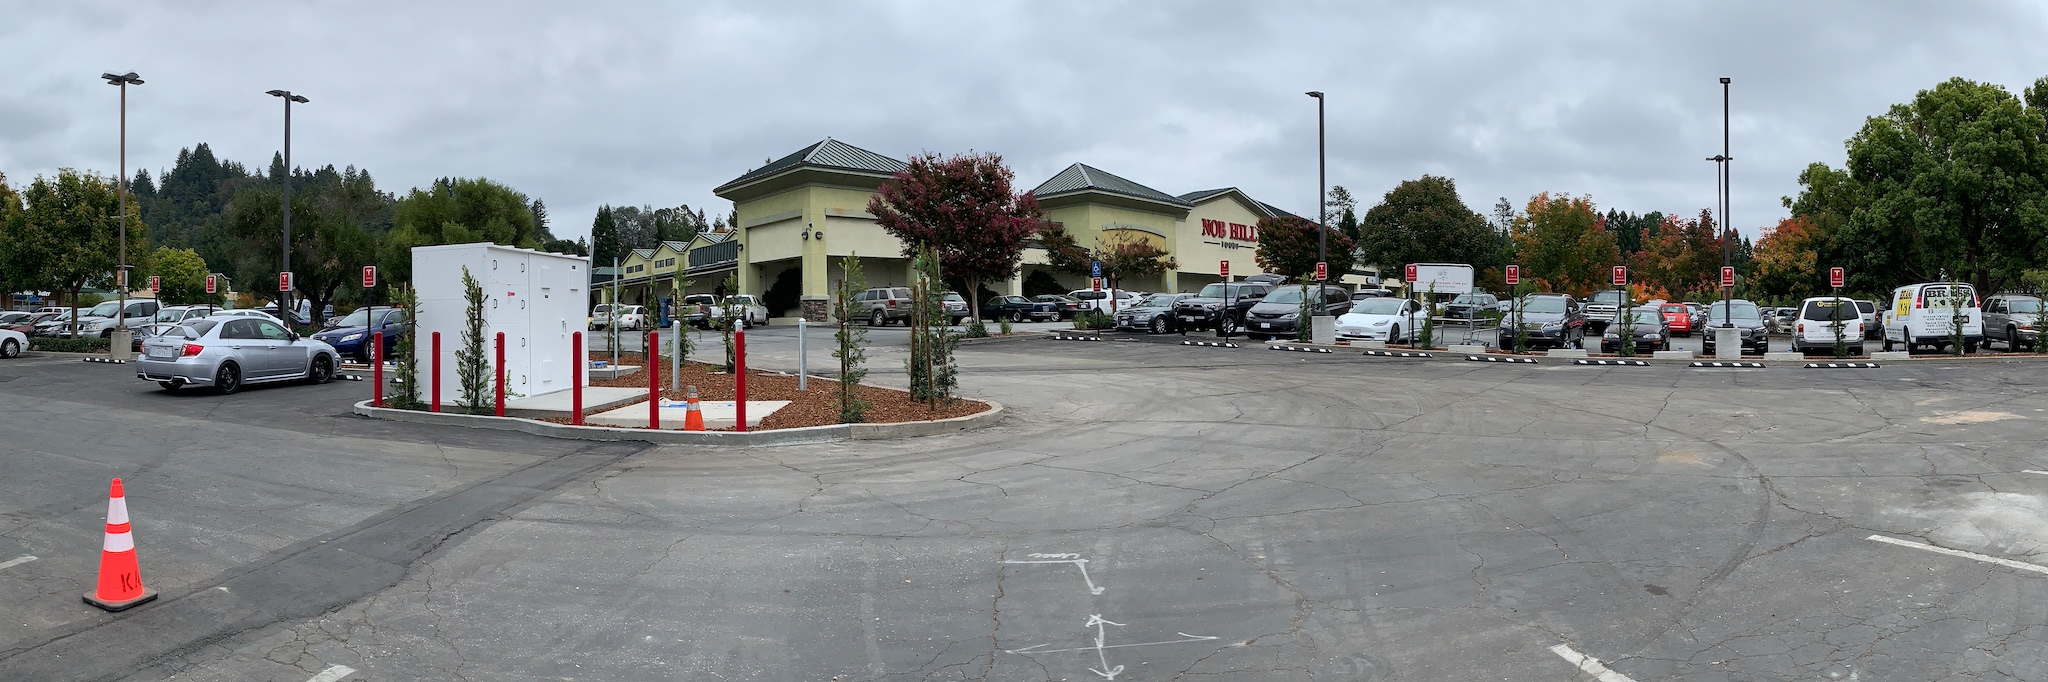 scotts-valley-chargers-pano1.jpg